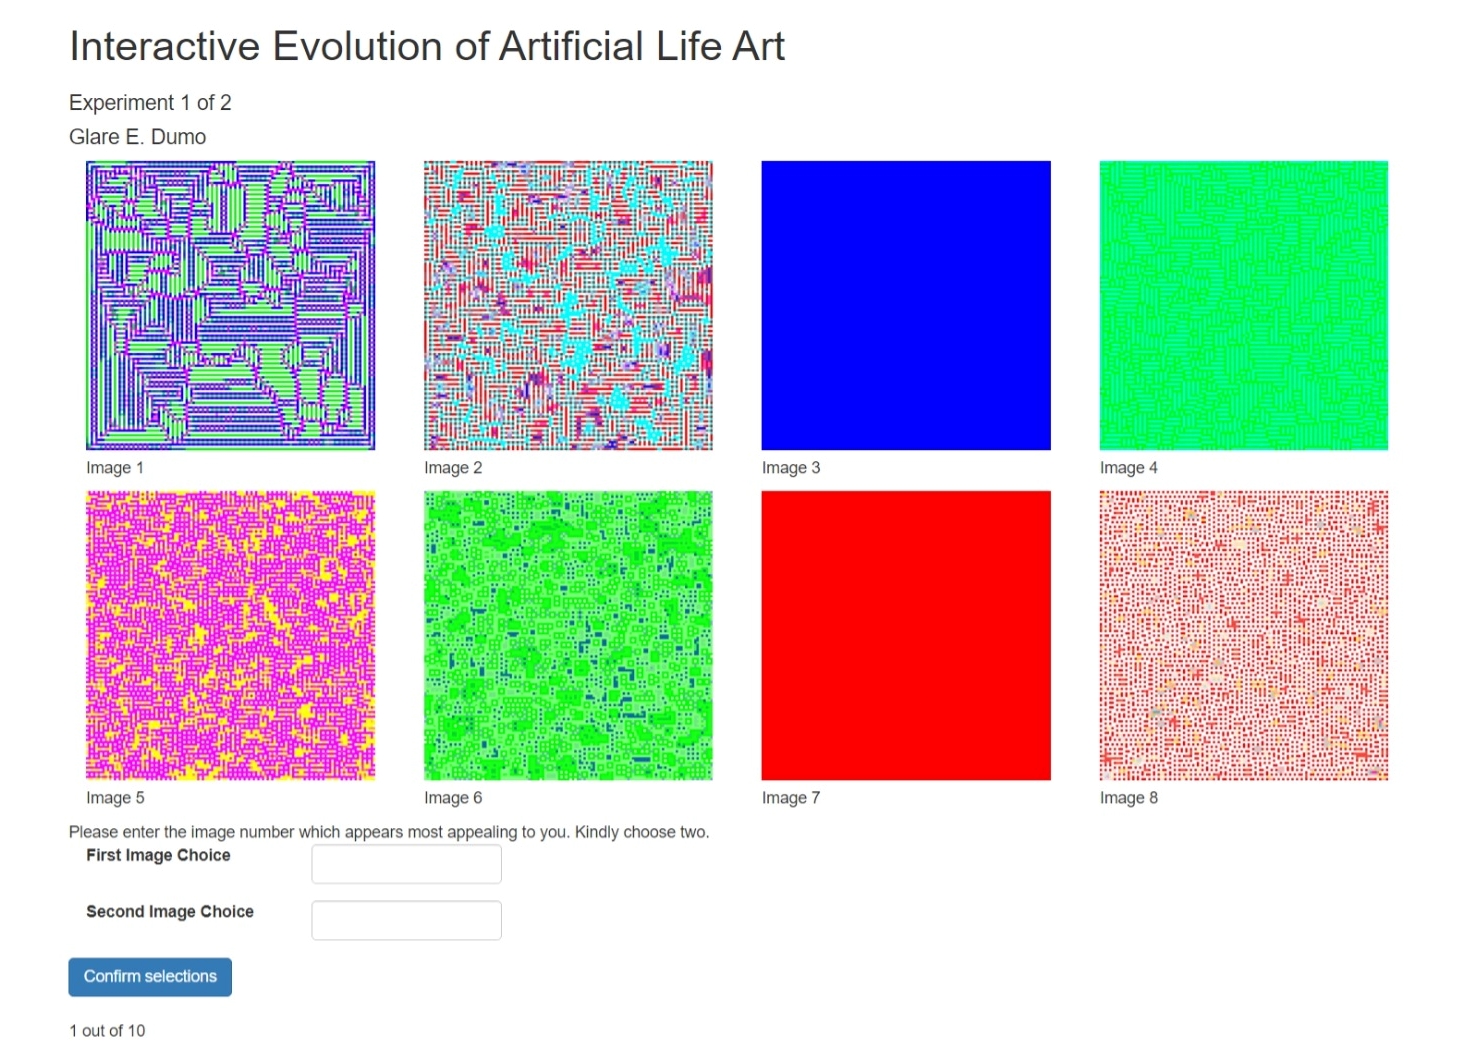 screenshot from Glare Dumos master thesis on interactive evolution of artificial life art